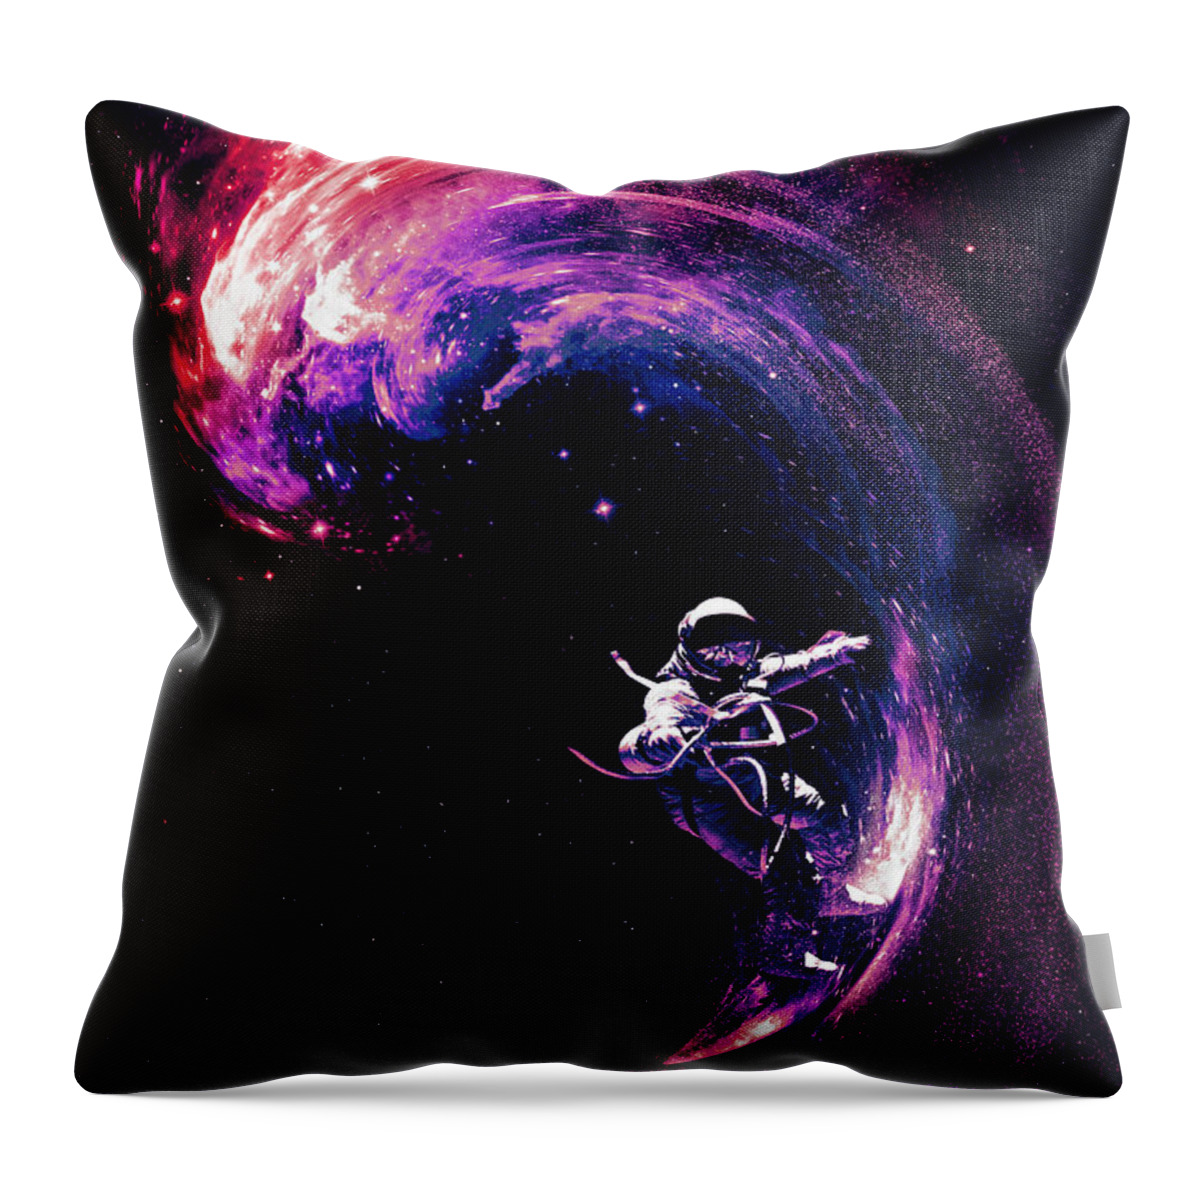 Space Throw Pillow featuring the digital art Space Surfing by Nicebleed 